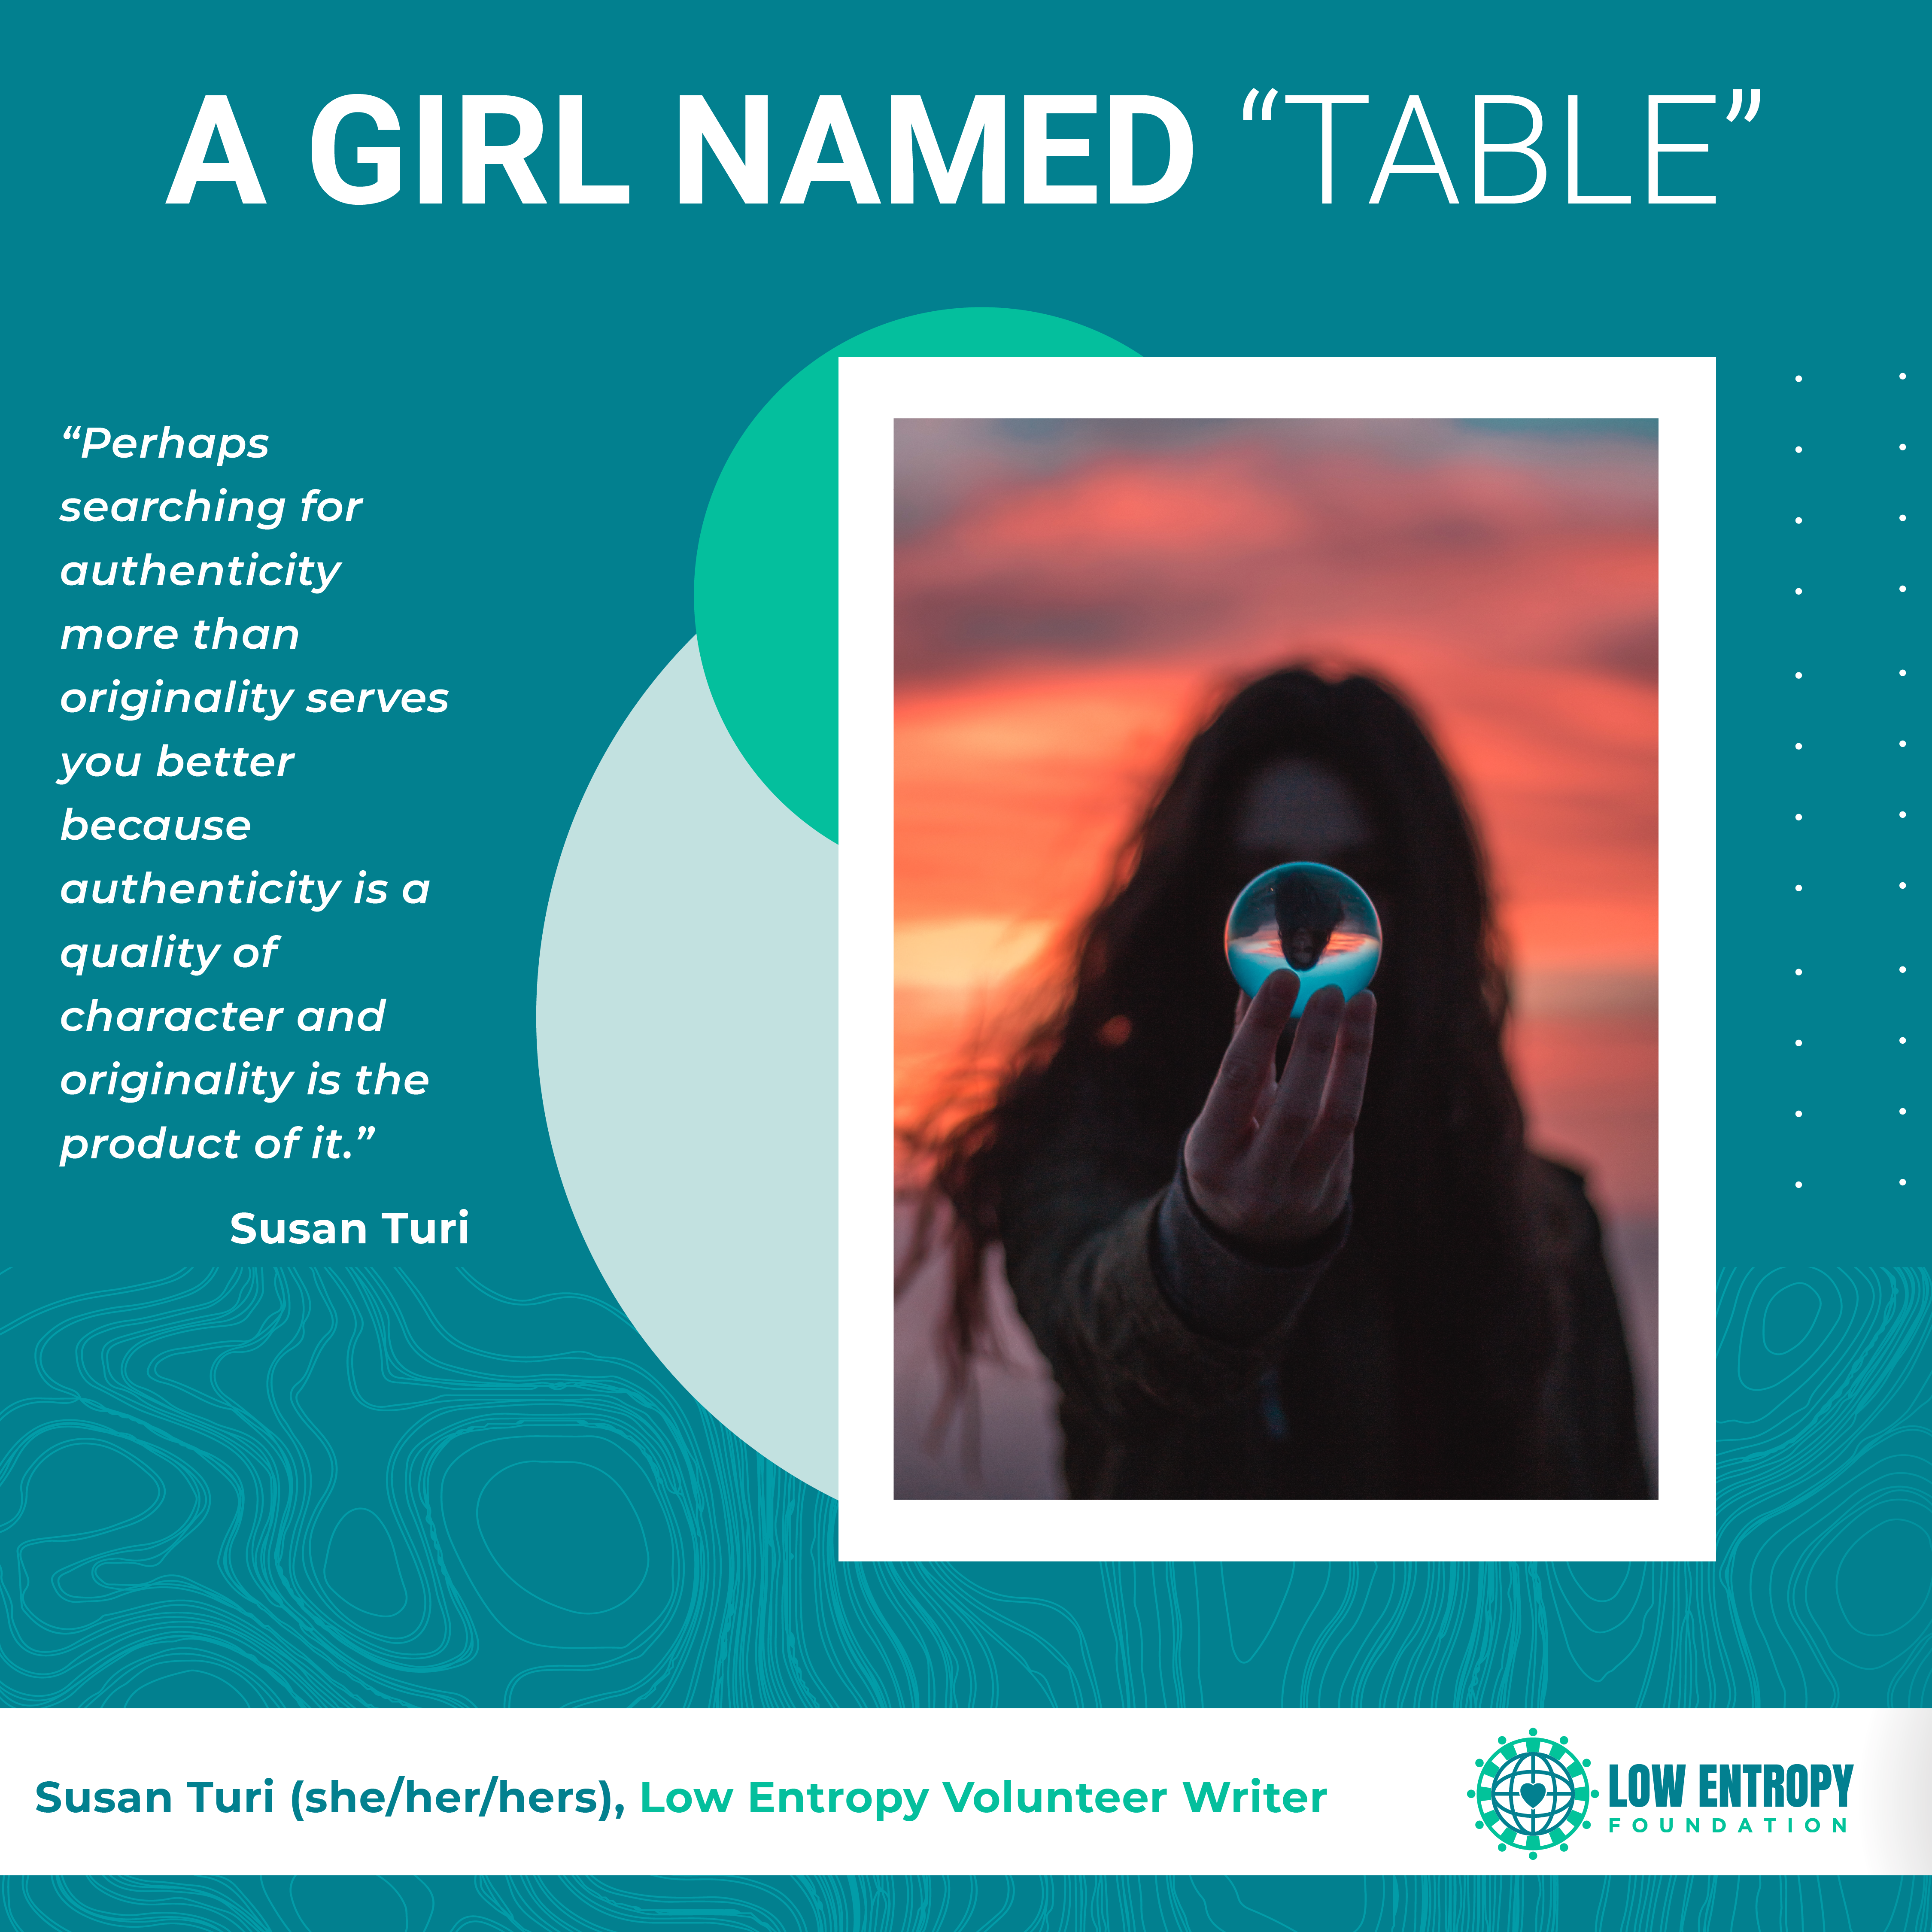 A Girl Named “Table”